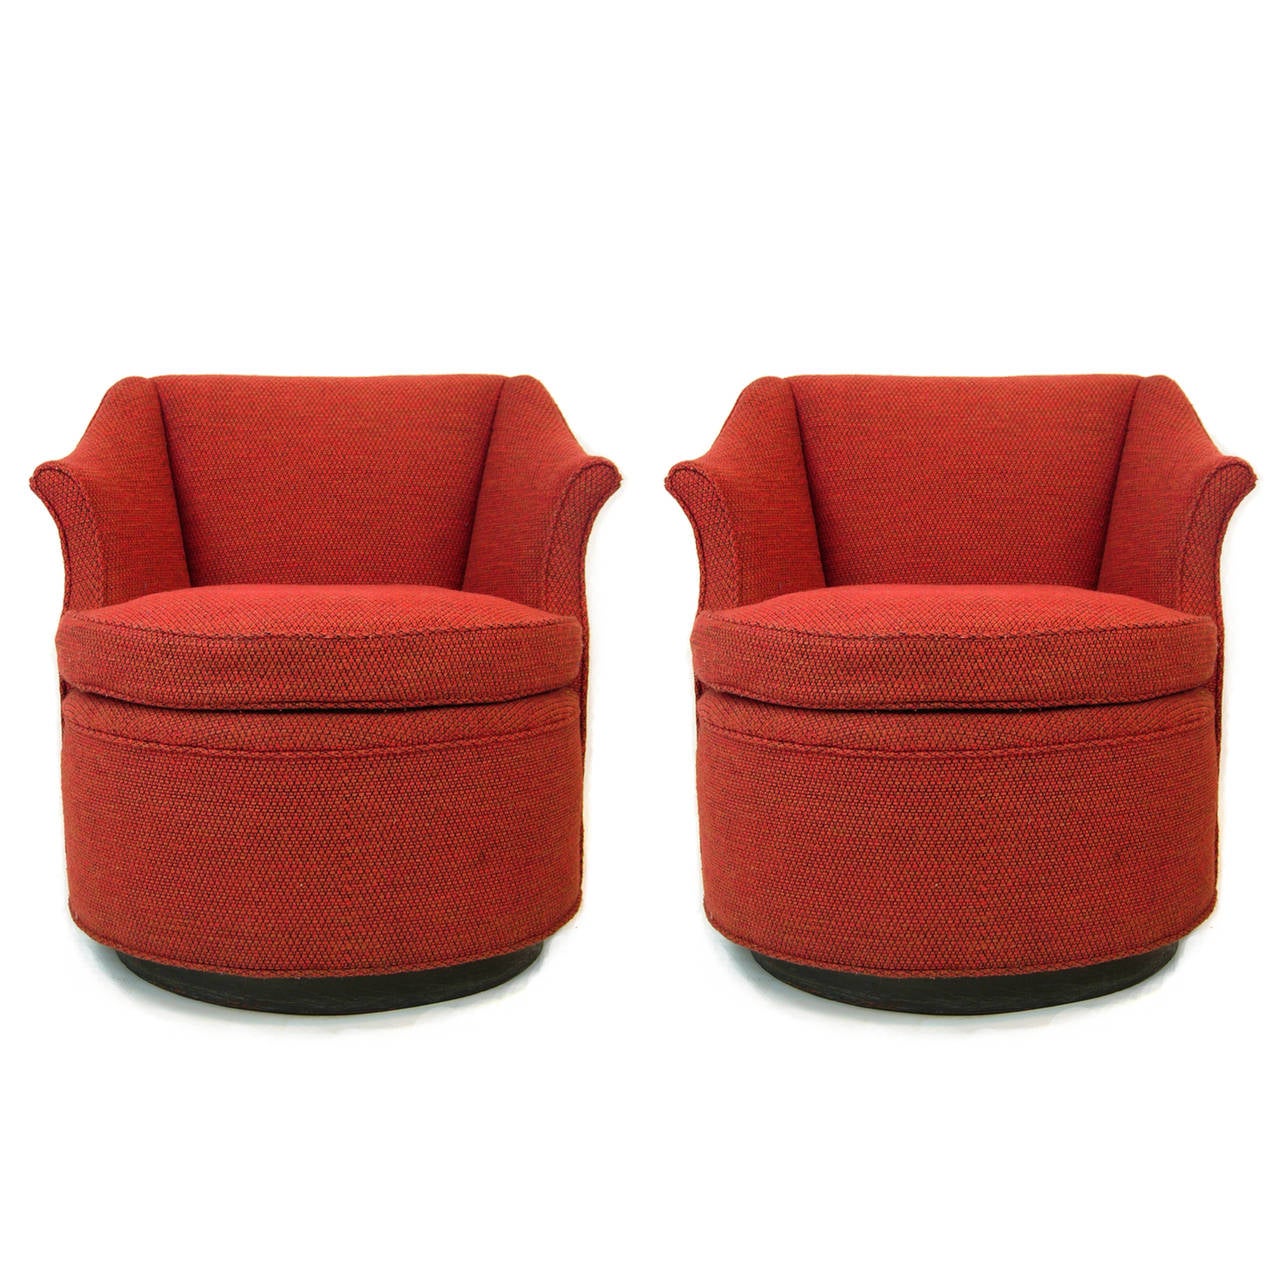 Mid-Century Modern Pair of Red Swivel Chairs Attributed to Edward Wormley for Dunbar Furniture